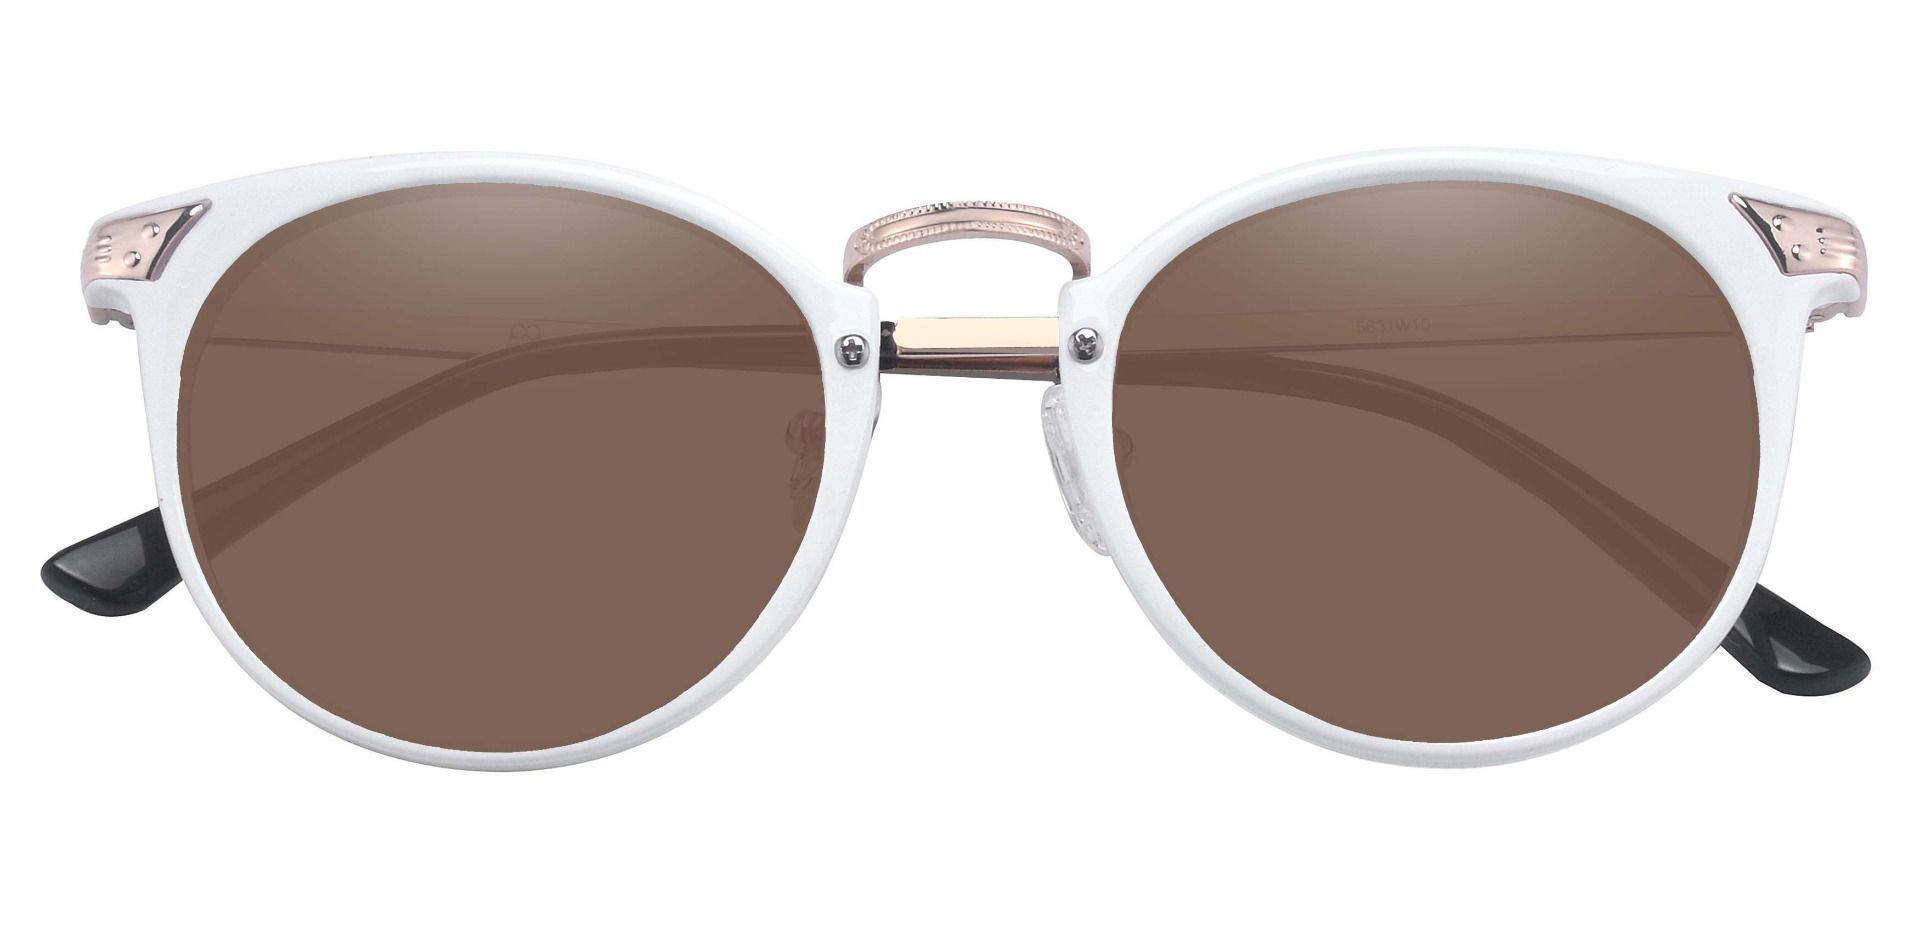 Blackwell Round Lined Bifocal Sunglasses - White Frame With Brown Lenses